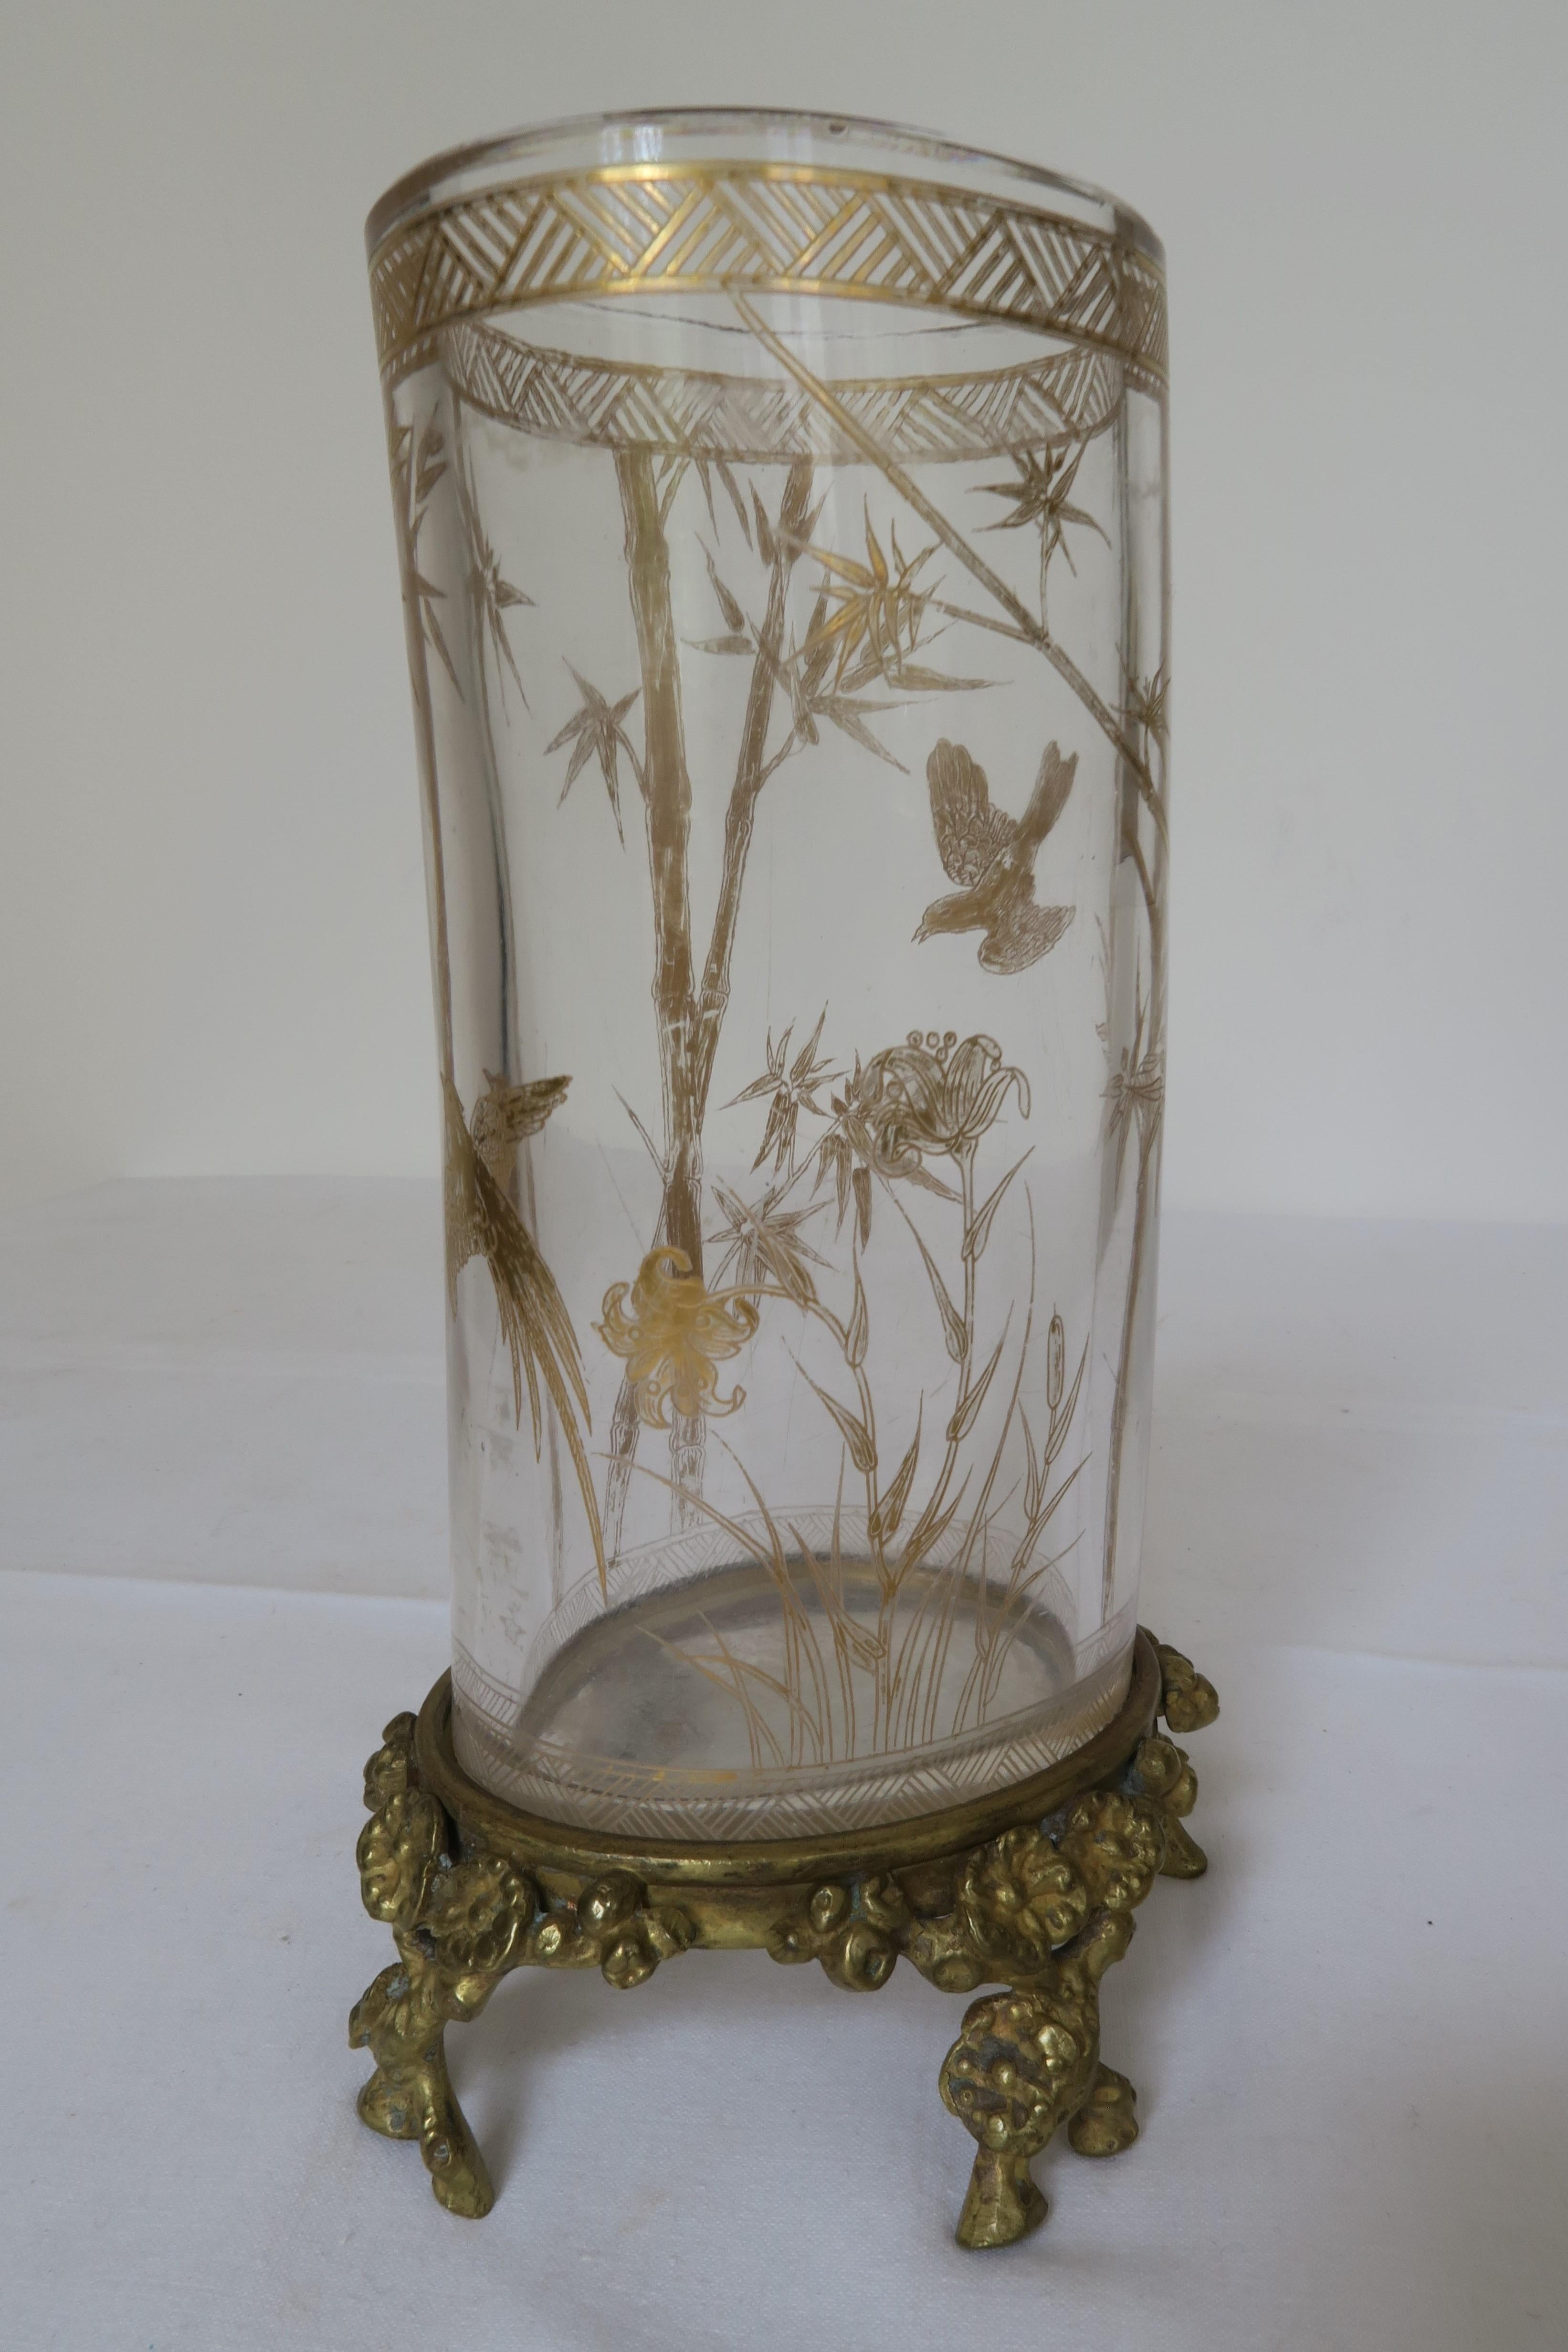 For sale is a special vase made by Baccarat. Fine engraved elephant tooth shaped heavy glass in fitted in a heavy brass mounting.The slightly bent glass cylinder has been gilded with an intricate design of birds, flowers and bamboo. The foot of the